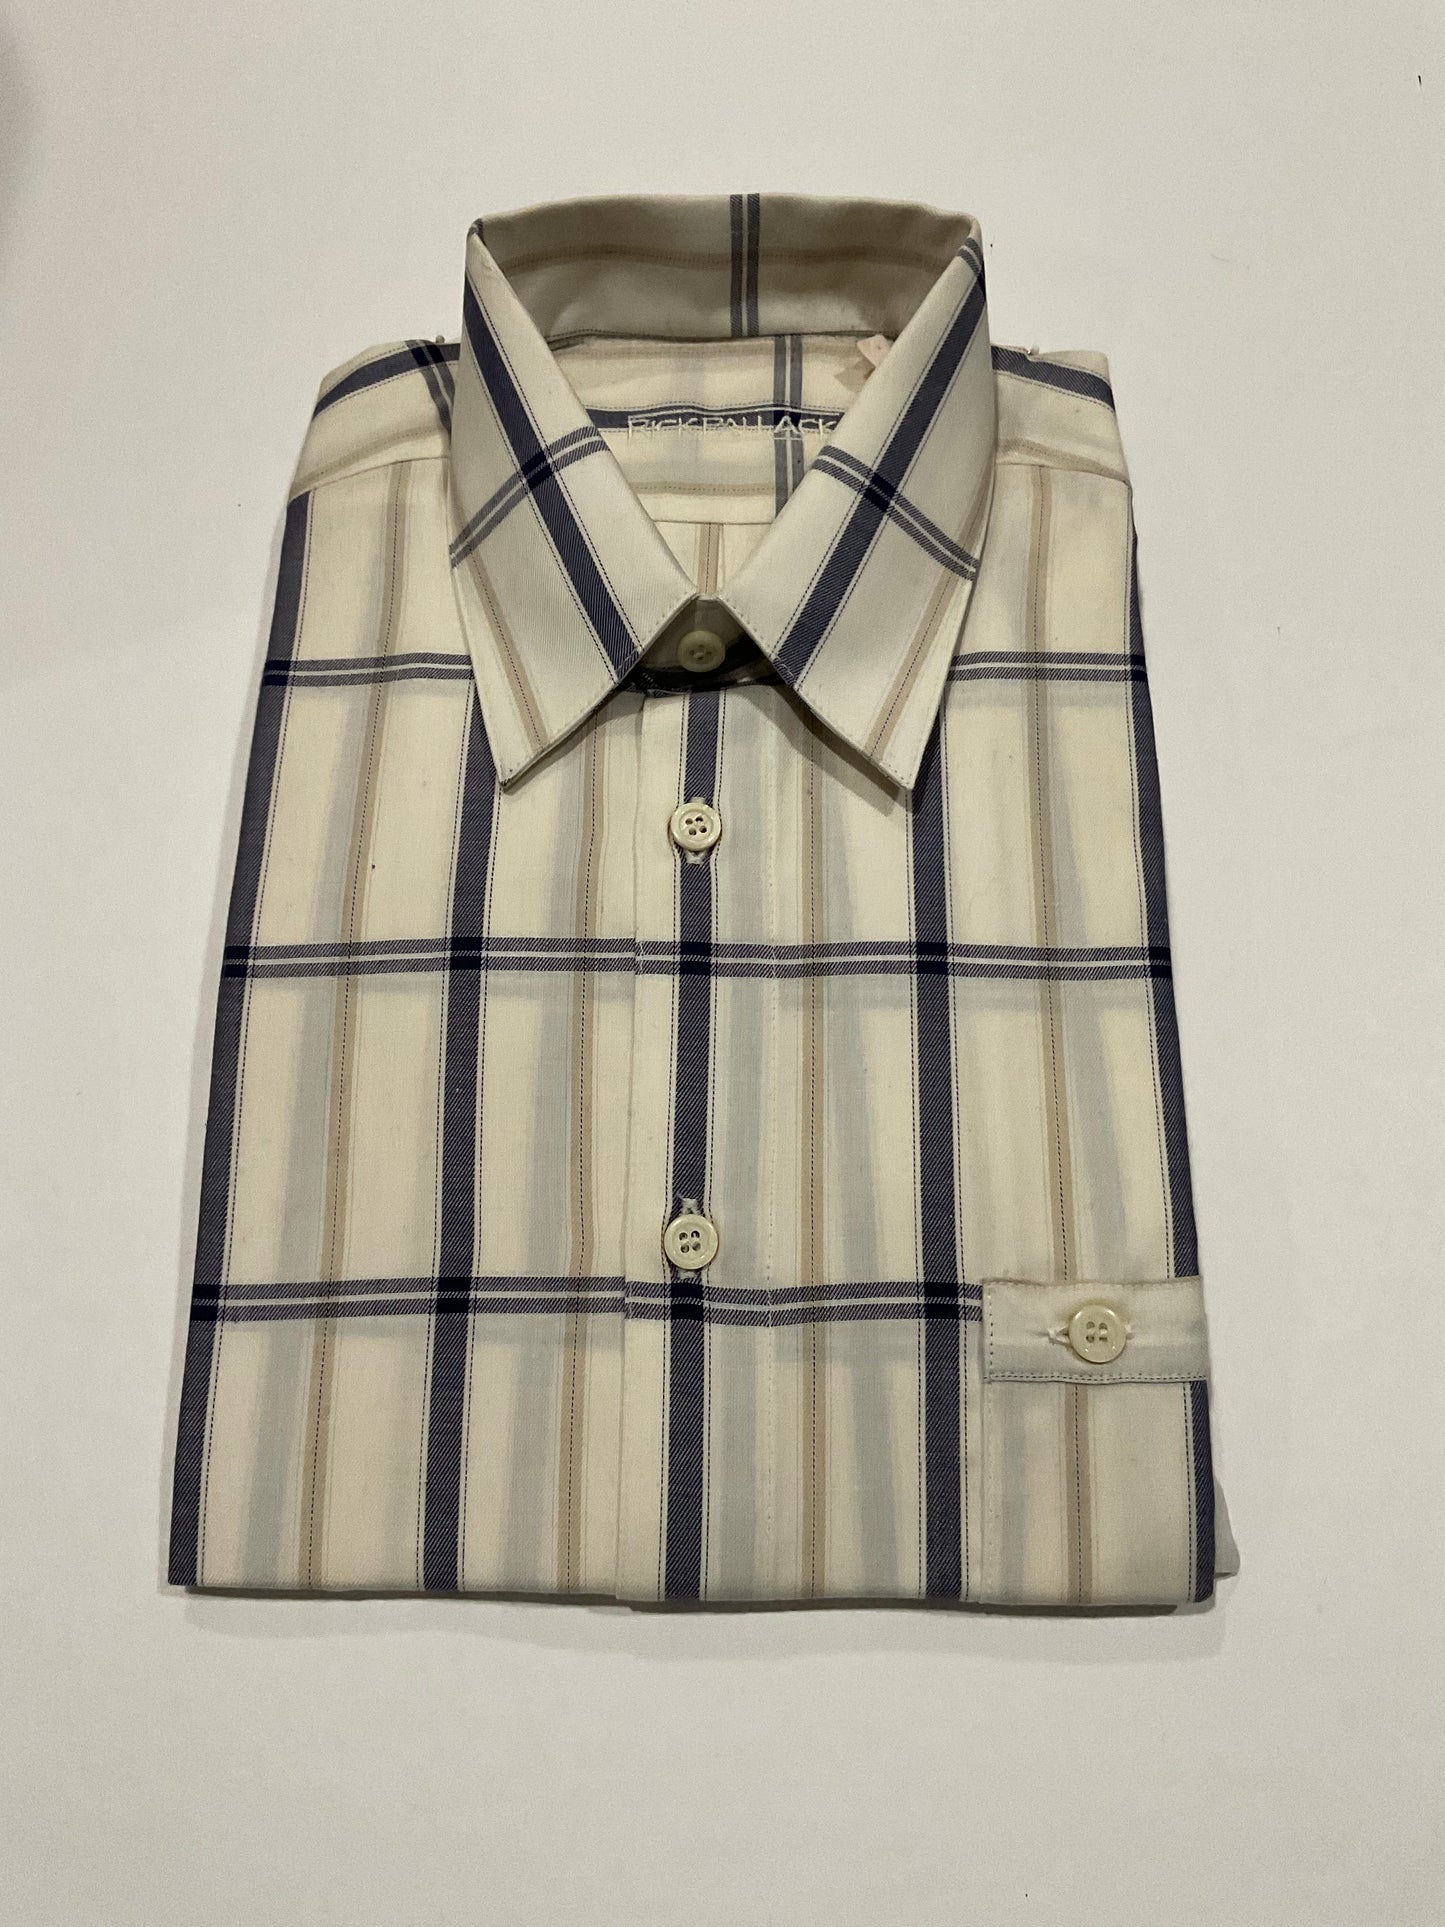 R P SPORT SHIRT / PURE COTTON / SMALL / MADE IN GERMANY